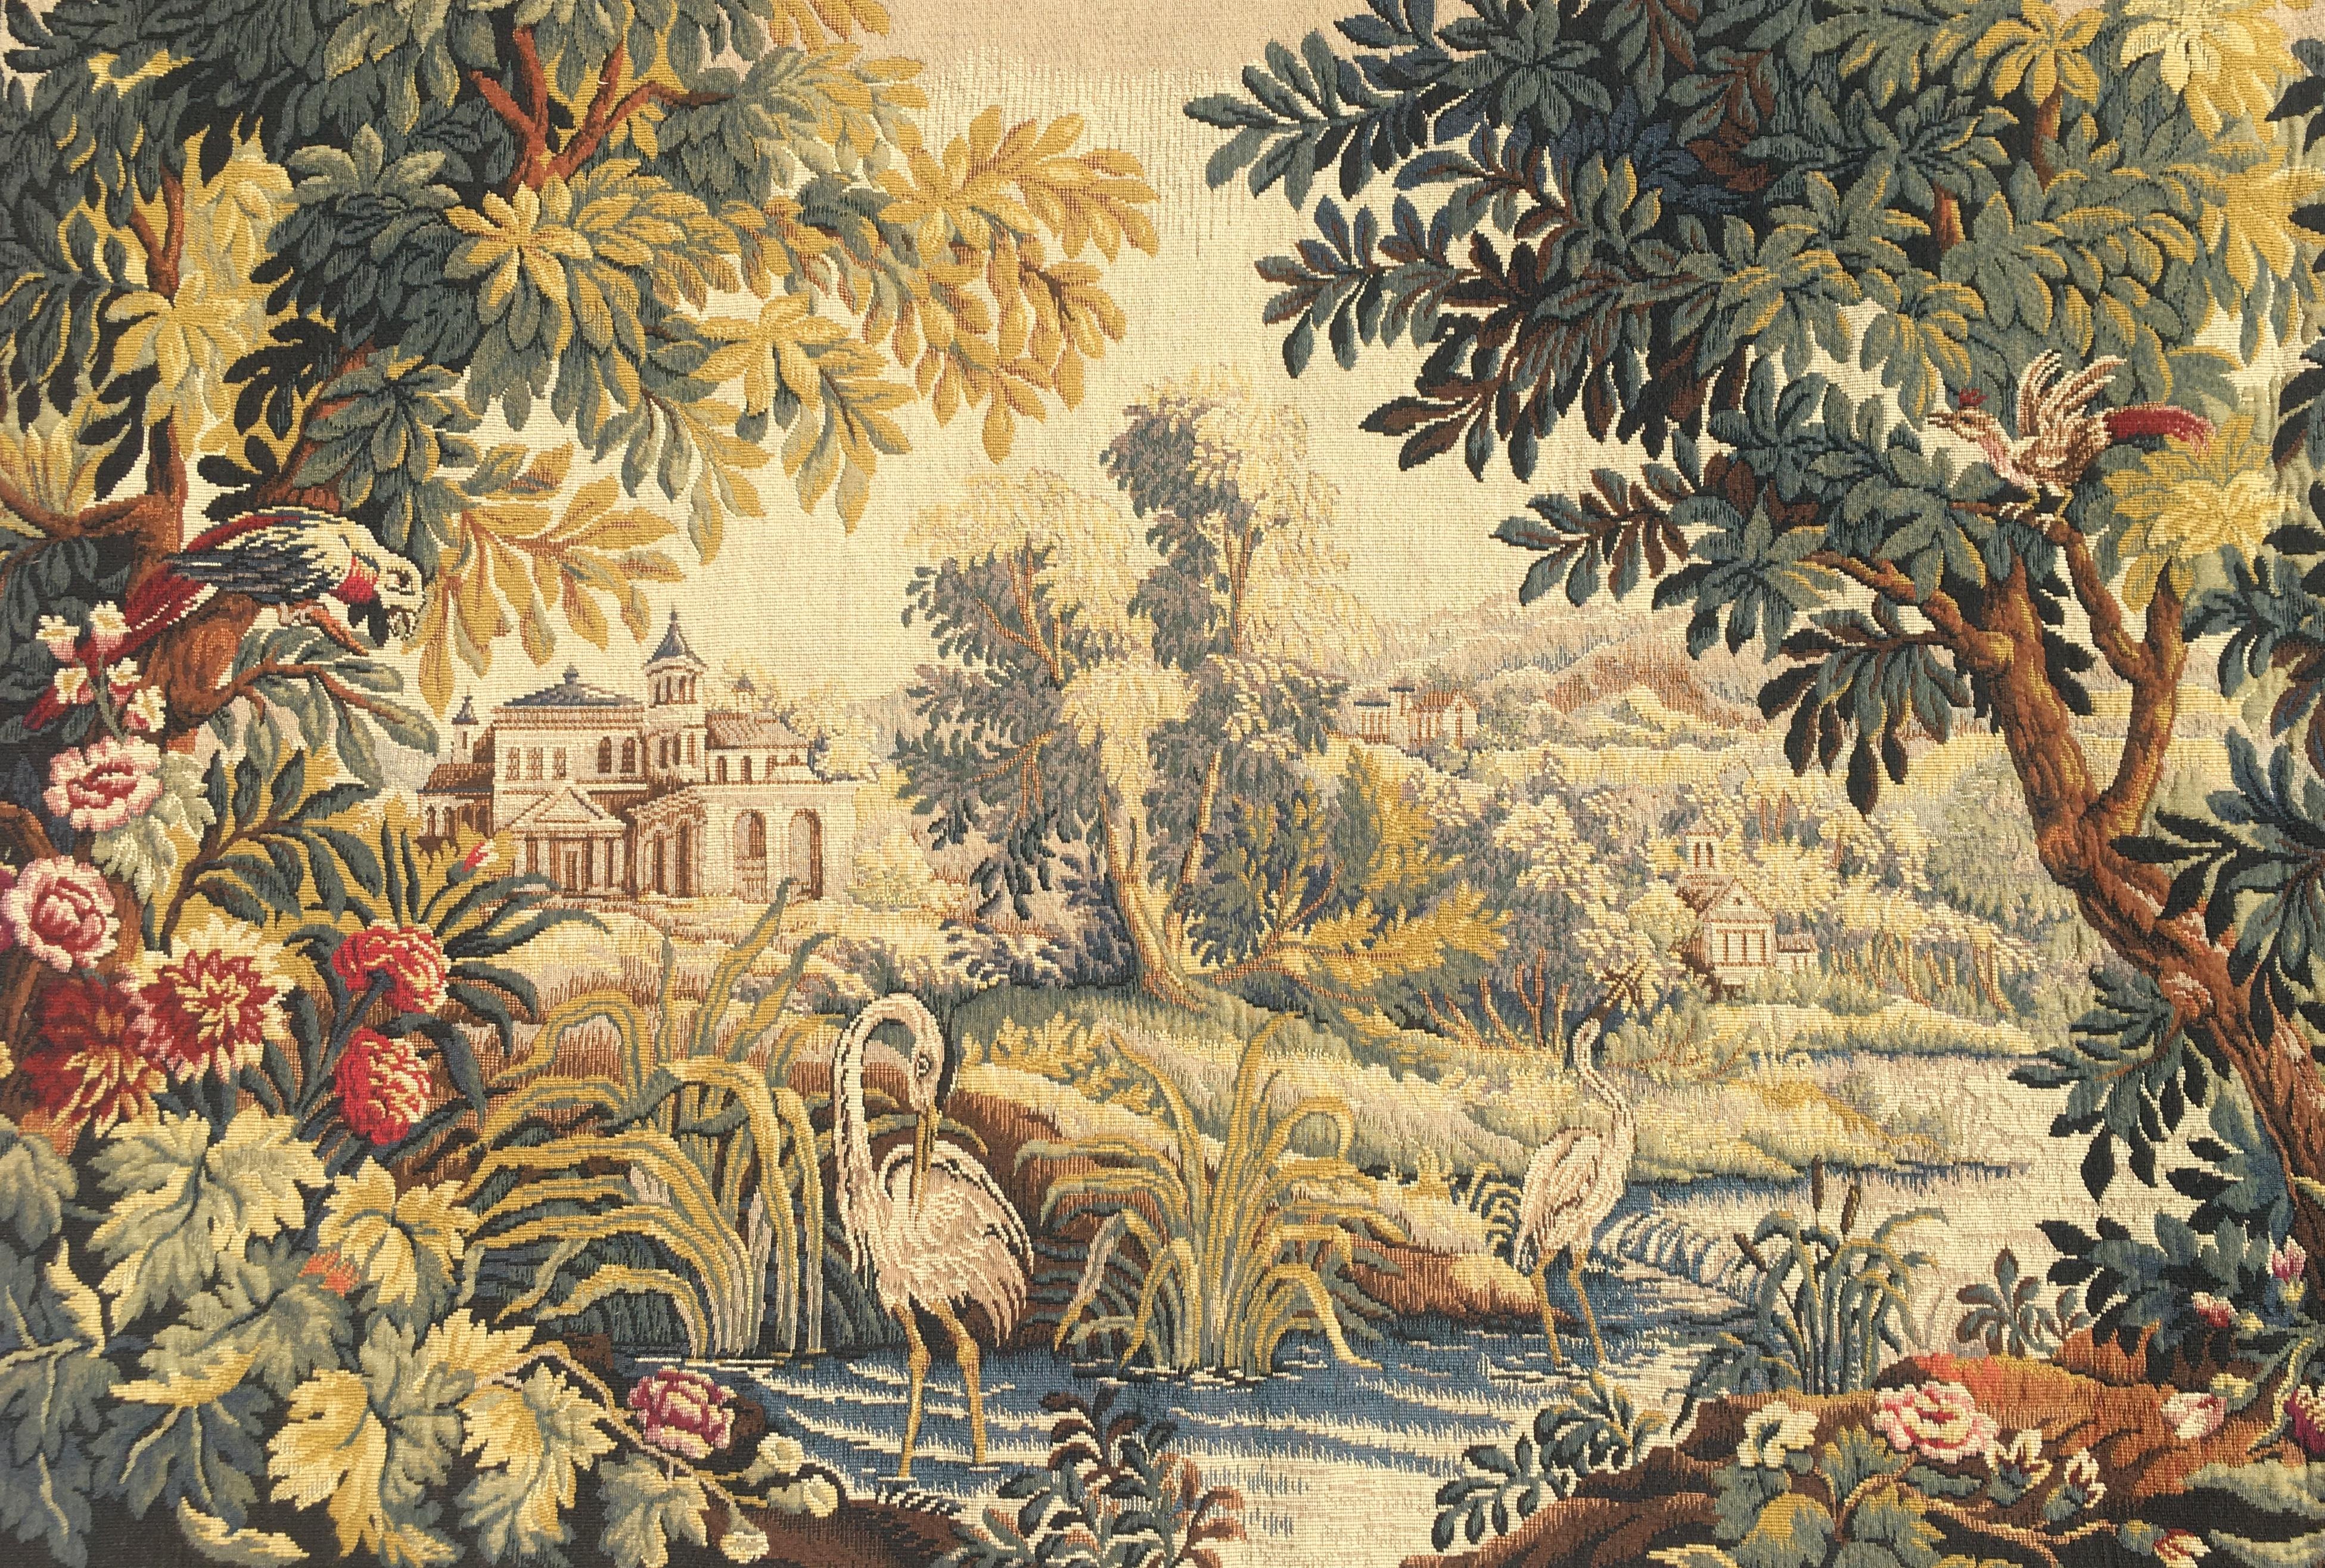 This colorful handmade tapestry was woven in Flandres de Halluin, France in the 20th century. The beautiful wall hanging depicts a traditional Aubusson scene. The lush, green composition features castles, domaines, a river, ducks and foliage.